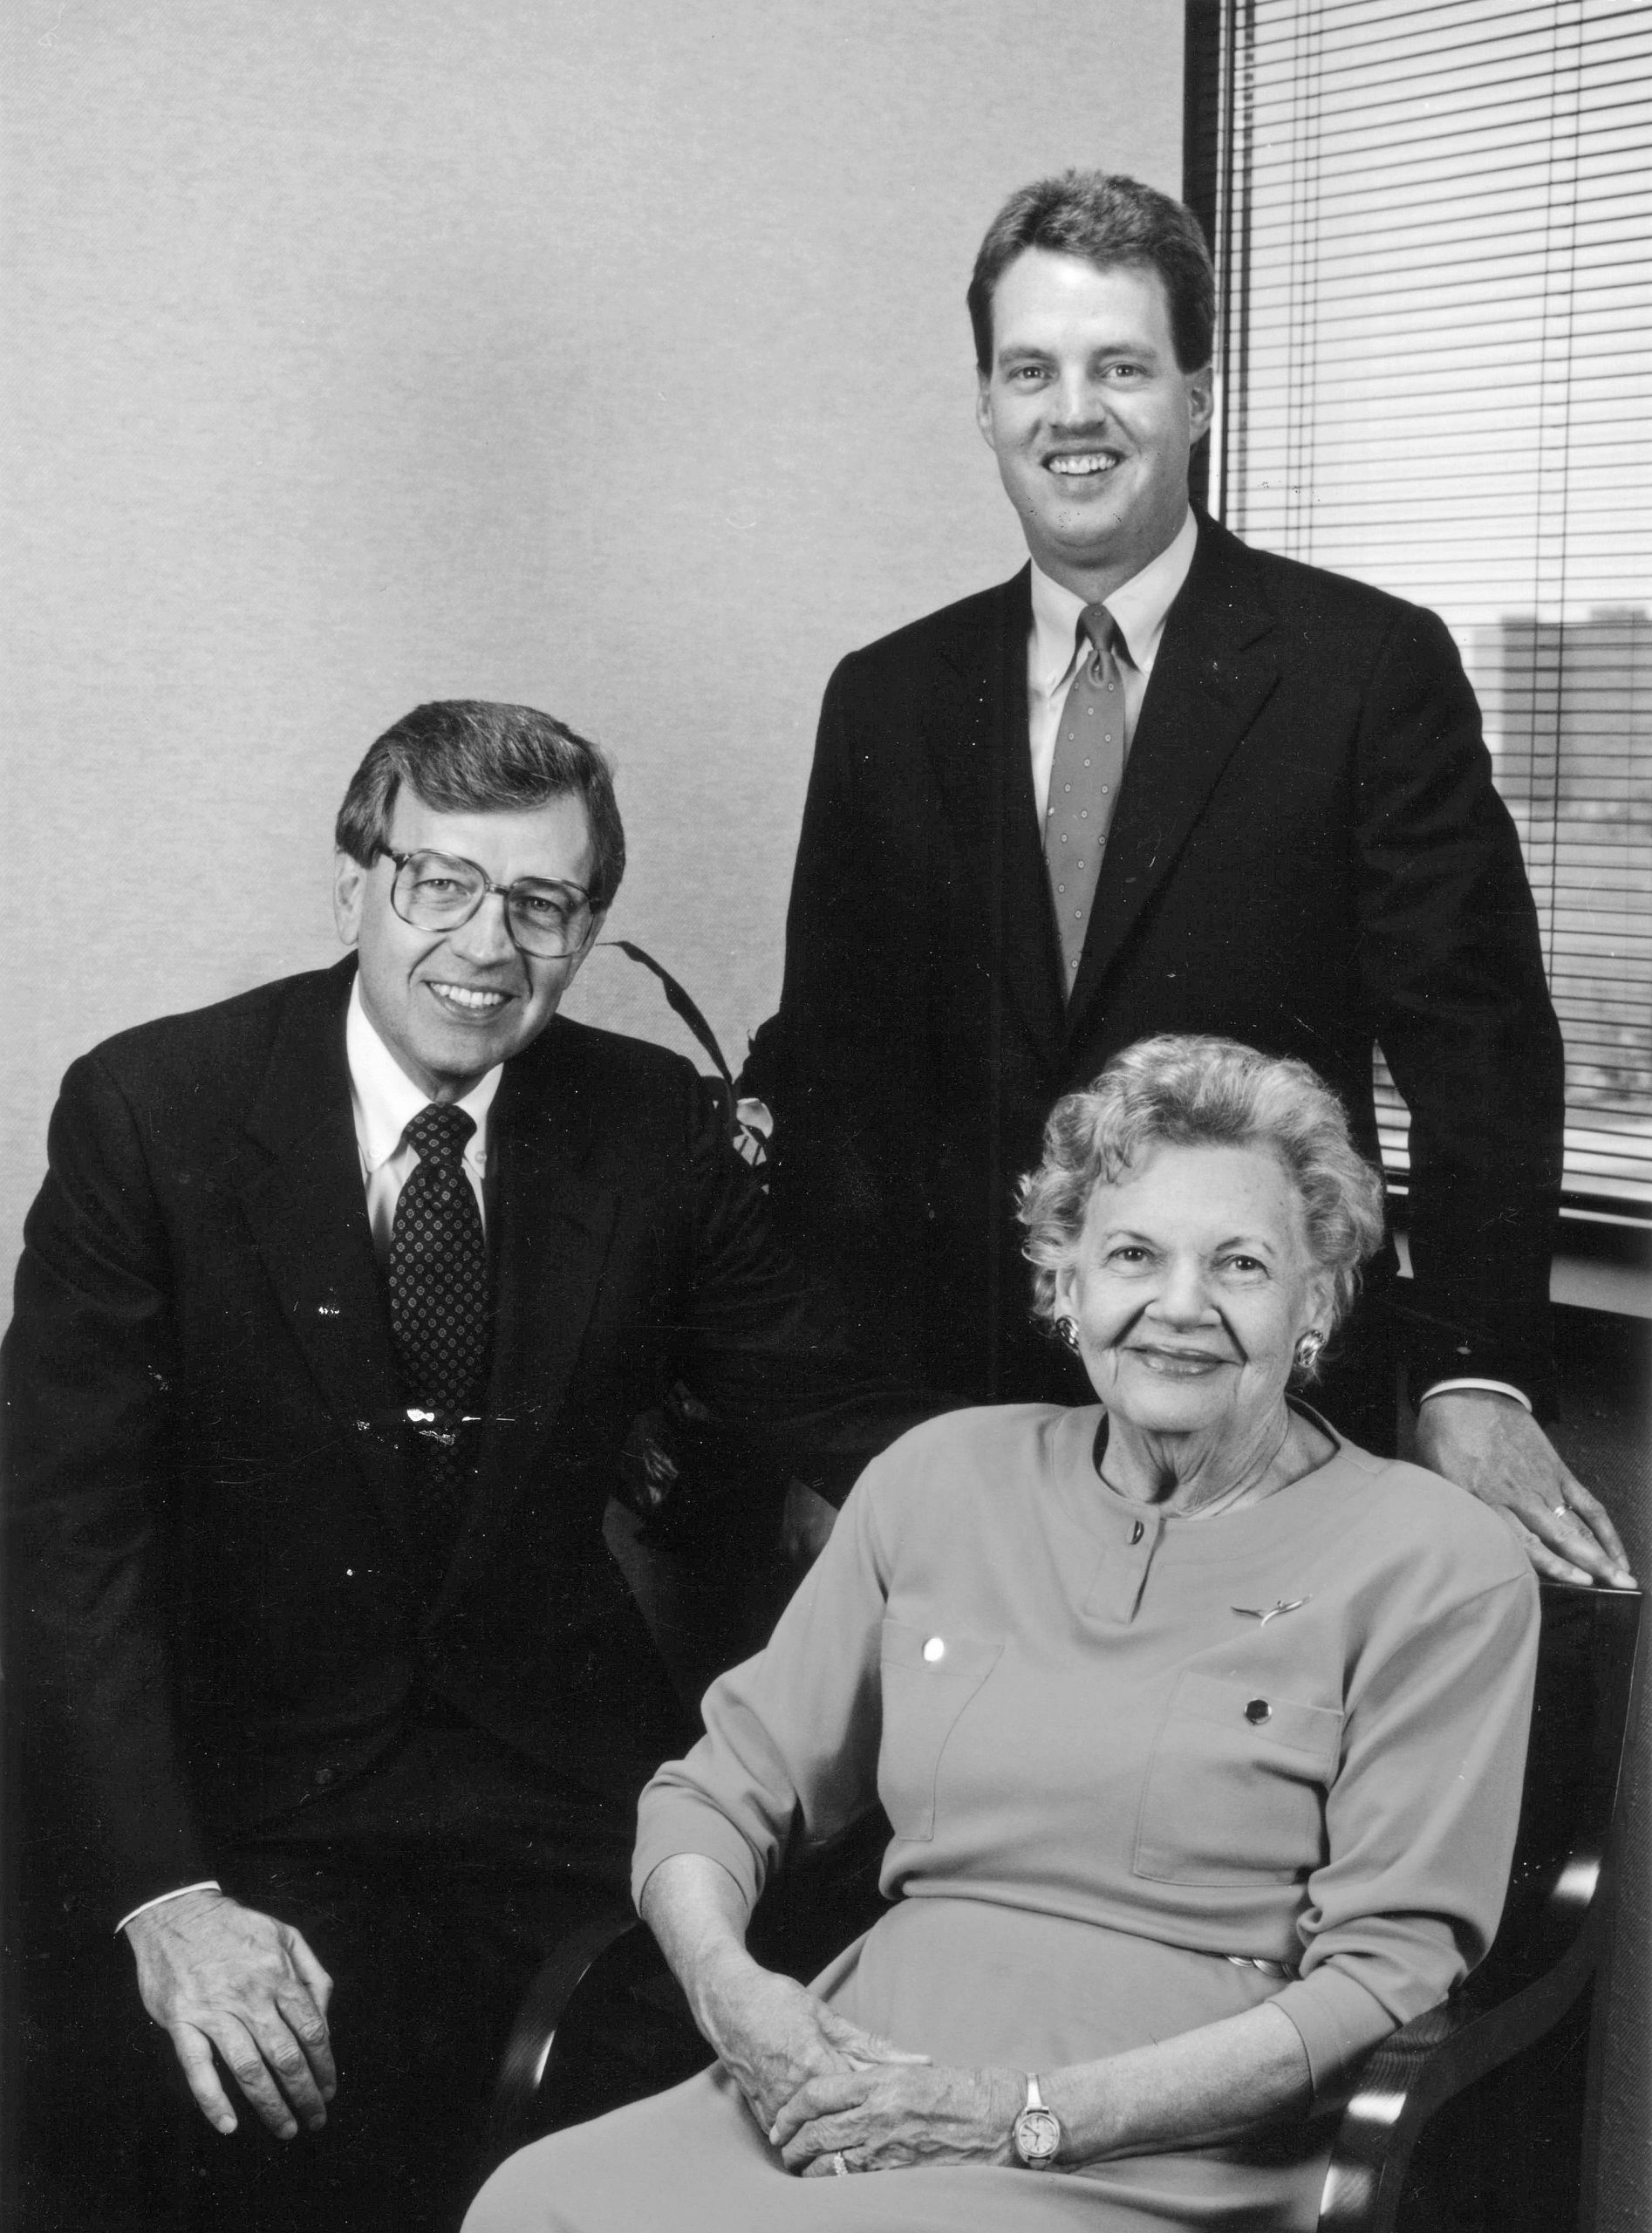 A group portrait of a woman and two men. 